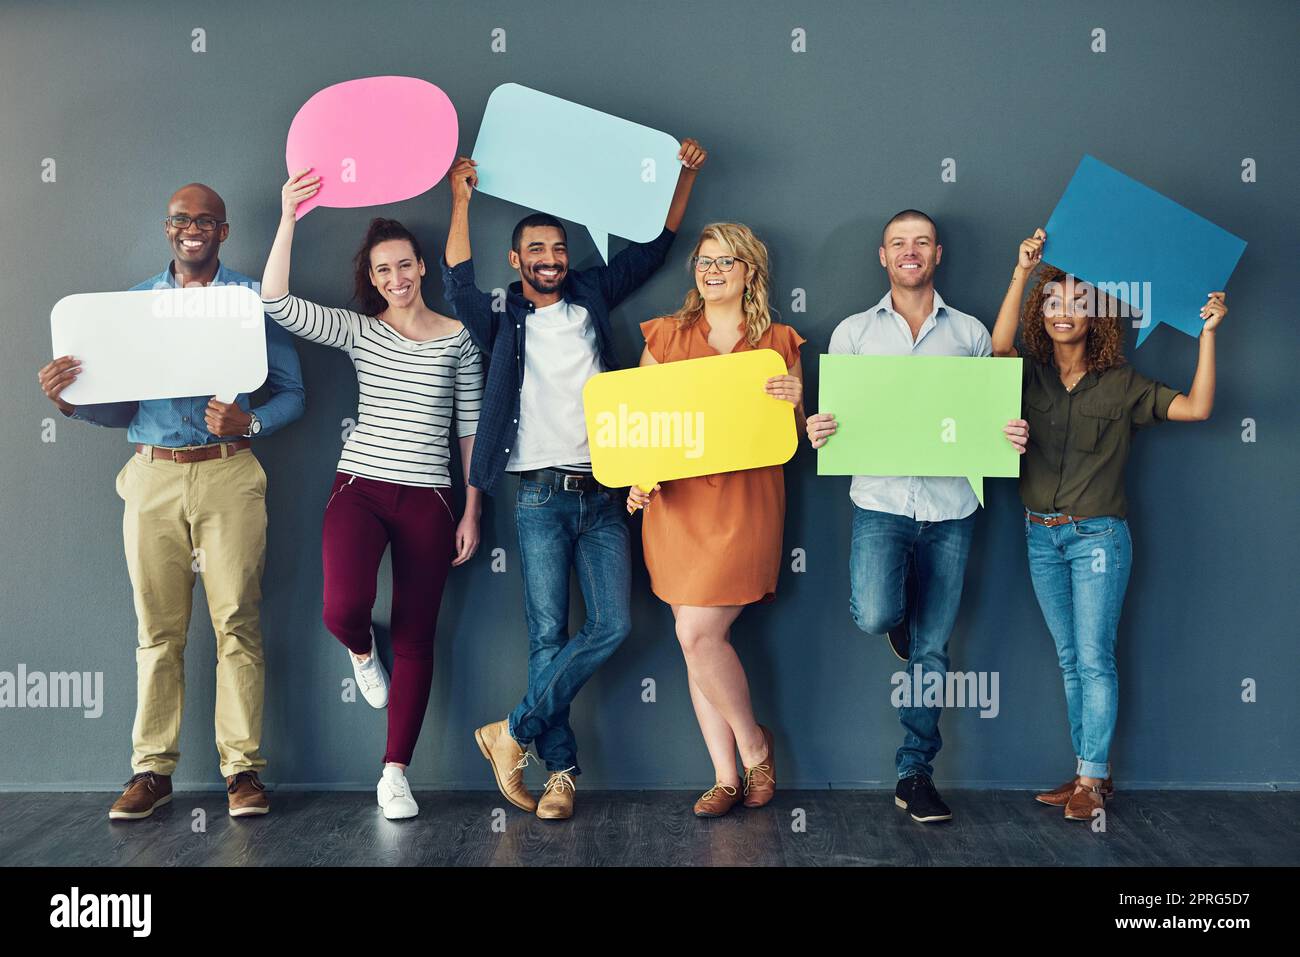 Speech bubbles, blank boards and signs held by voters with freedom of democracy and opinion. The review, say and voice of people in public news adds good comments to a diverse group Stock Photo